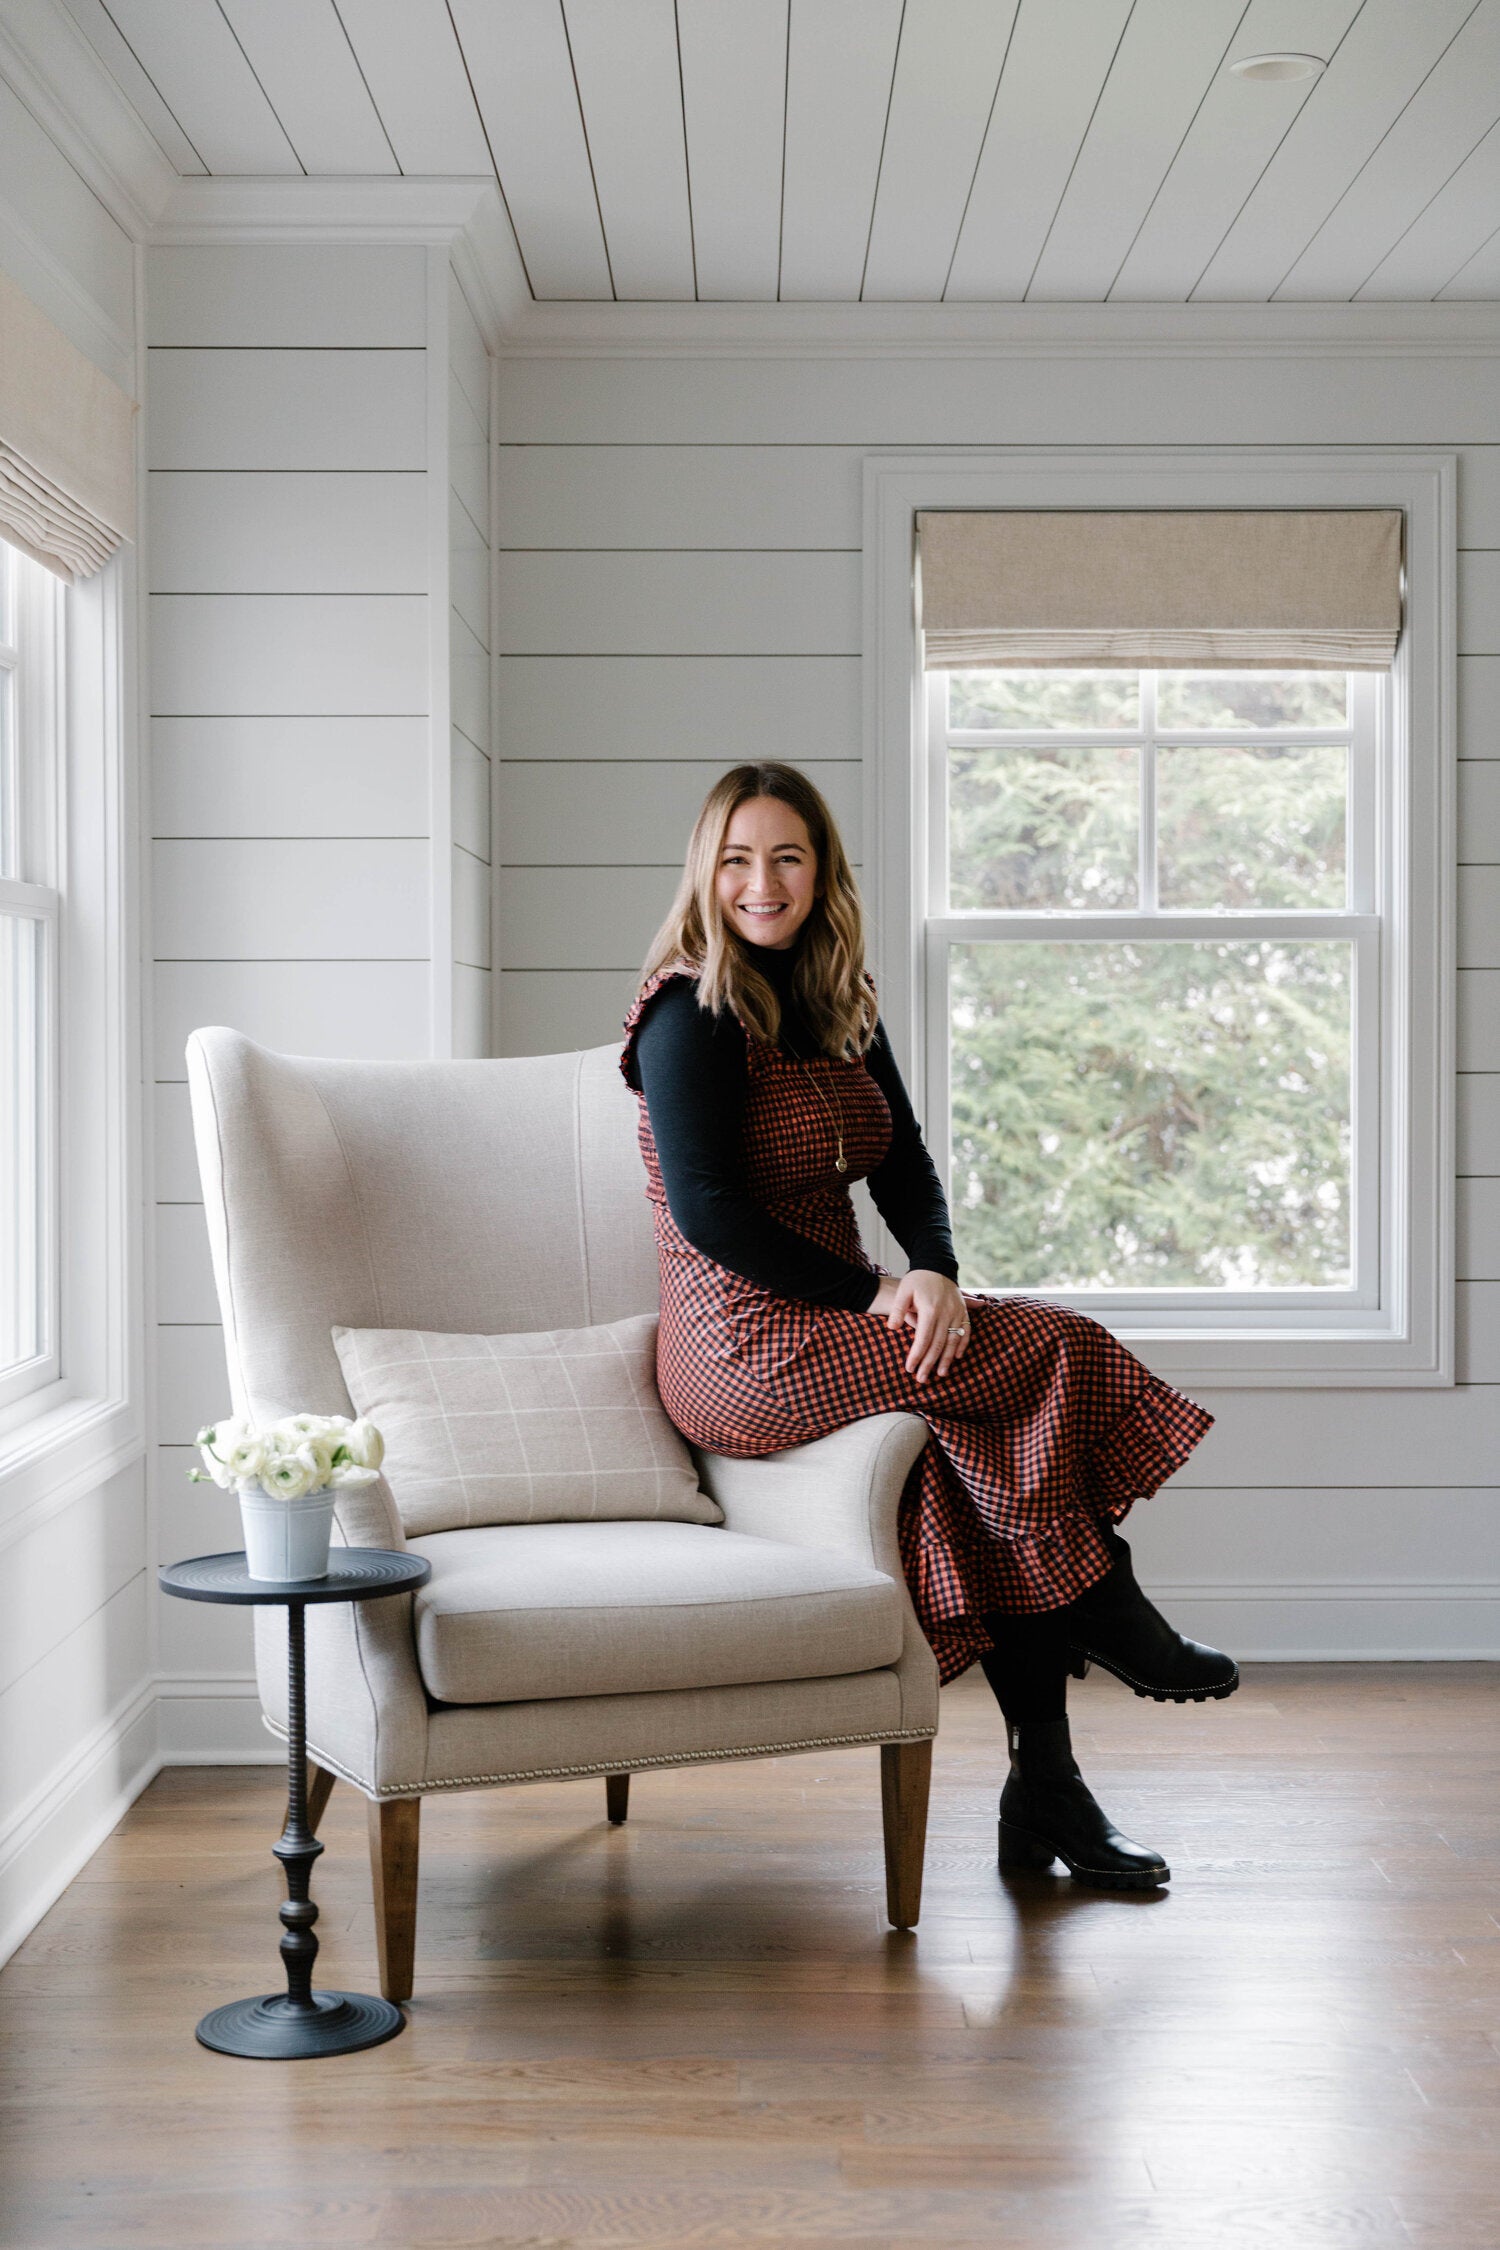 Making Spaces Personal with Emma Beryl, Emma Beryl Interiors